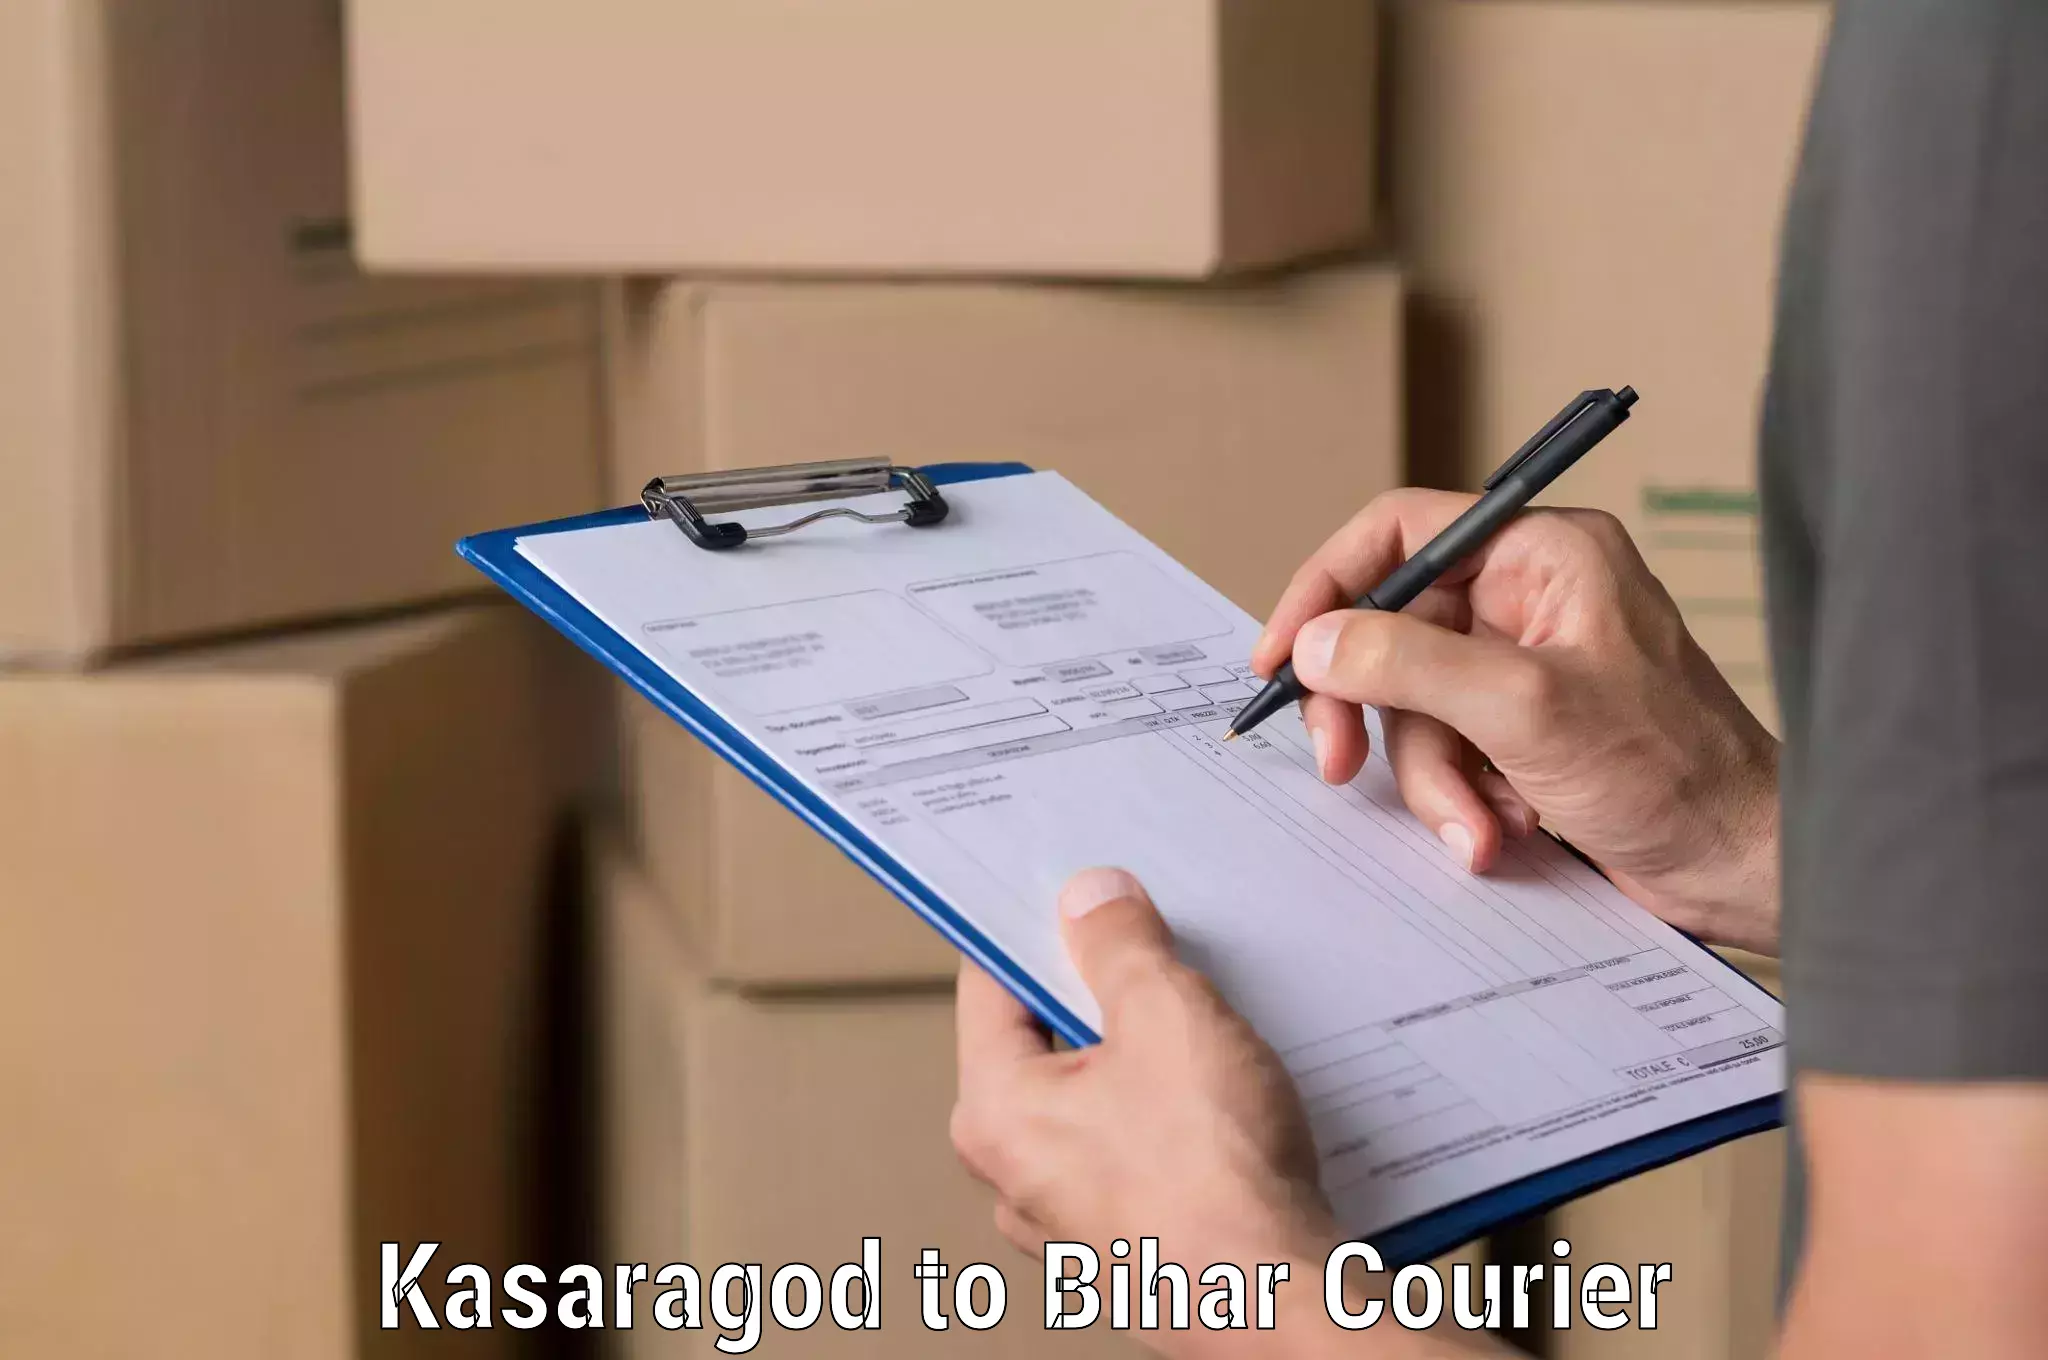 State-of-the-art courier technology Kasaragod to Bihar